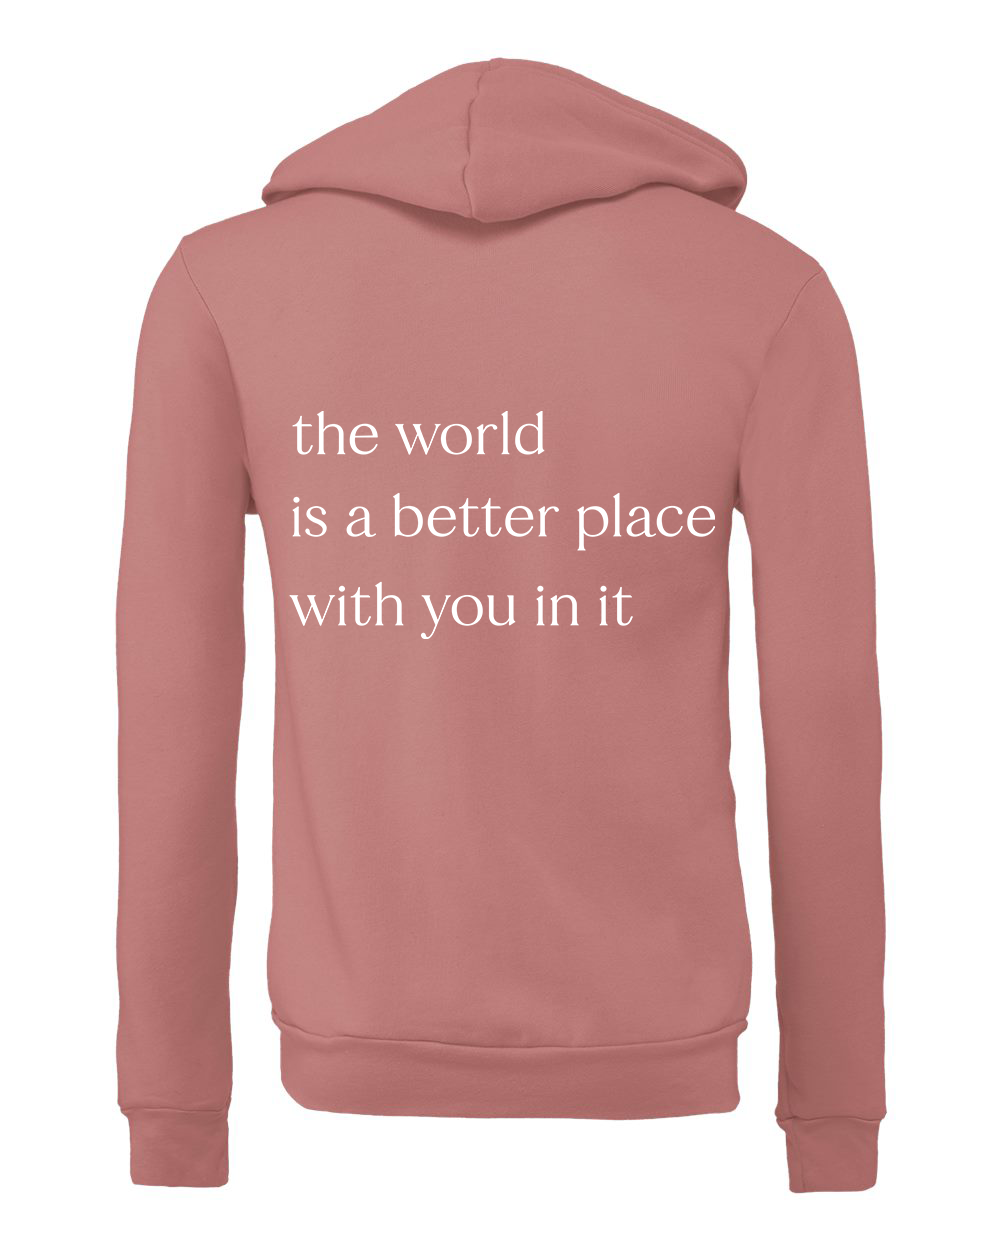 The World Is a Better Place With You In It Zip Hoodie  |  White Ink